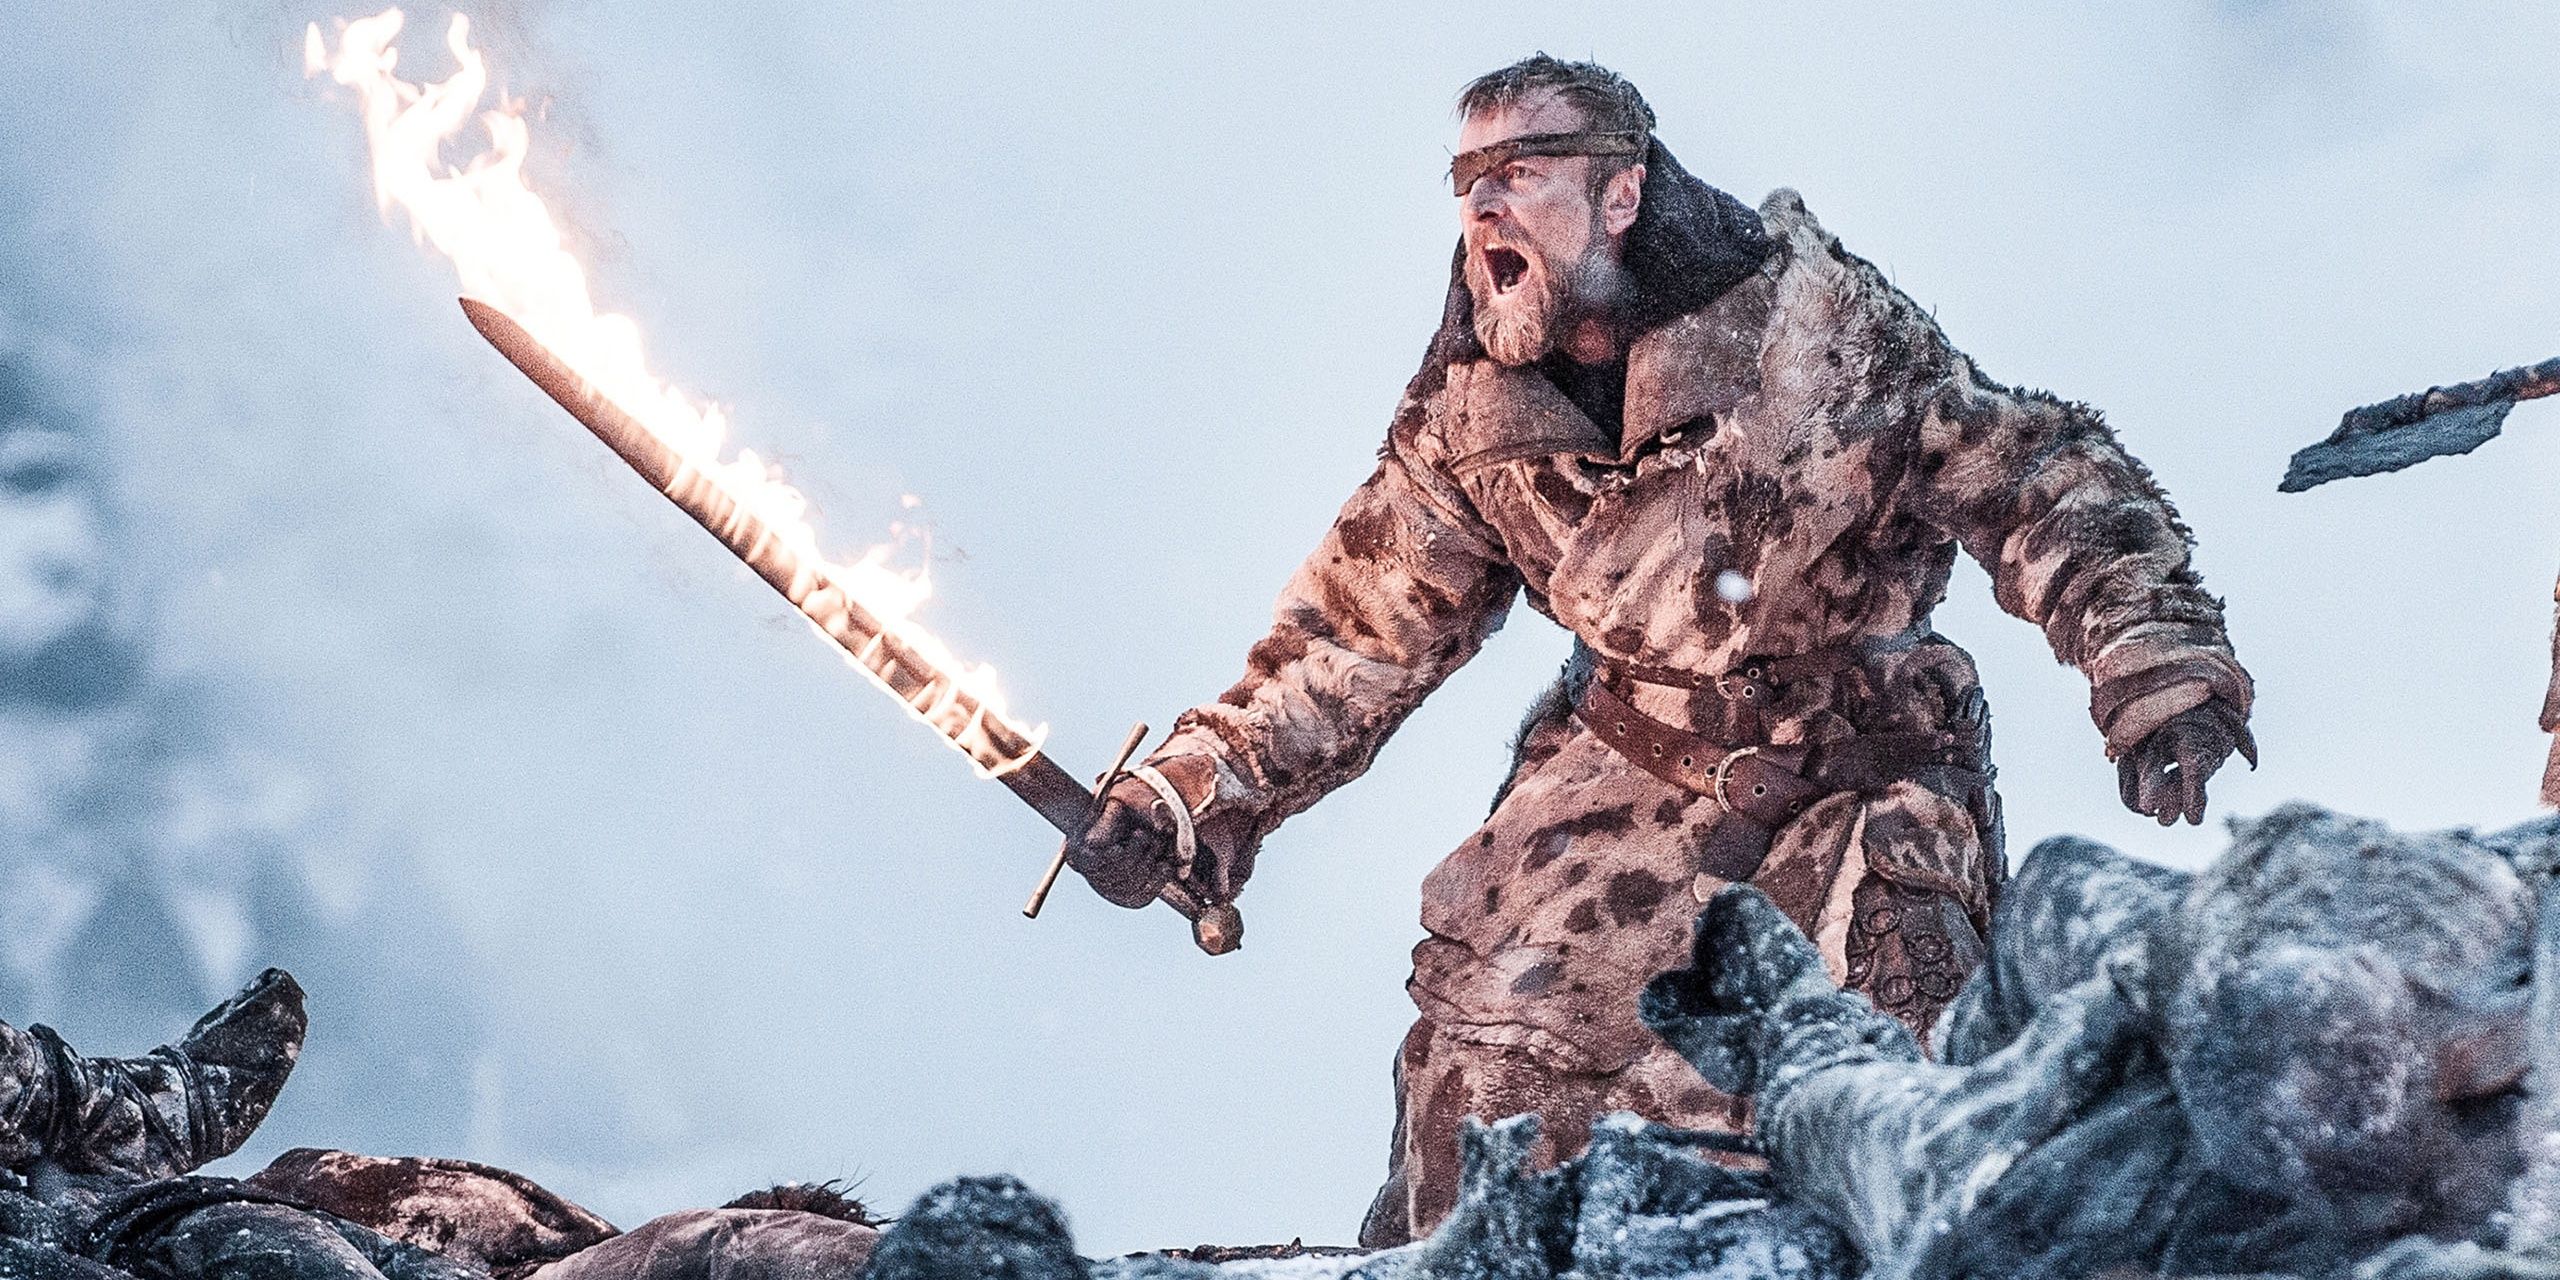 Beric Dondarrion with a flaming sword in Game of Thrones